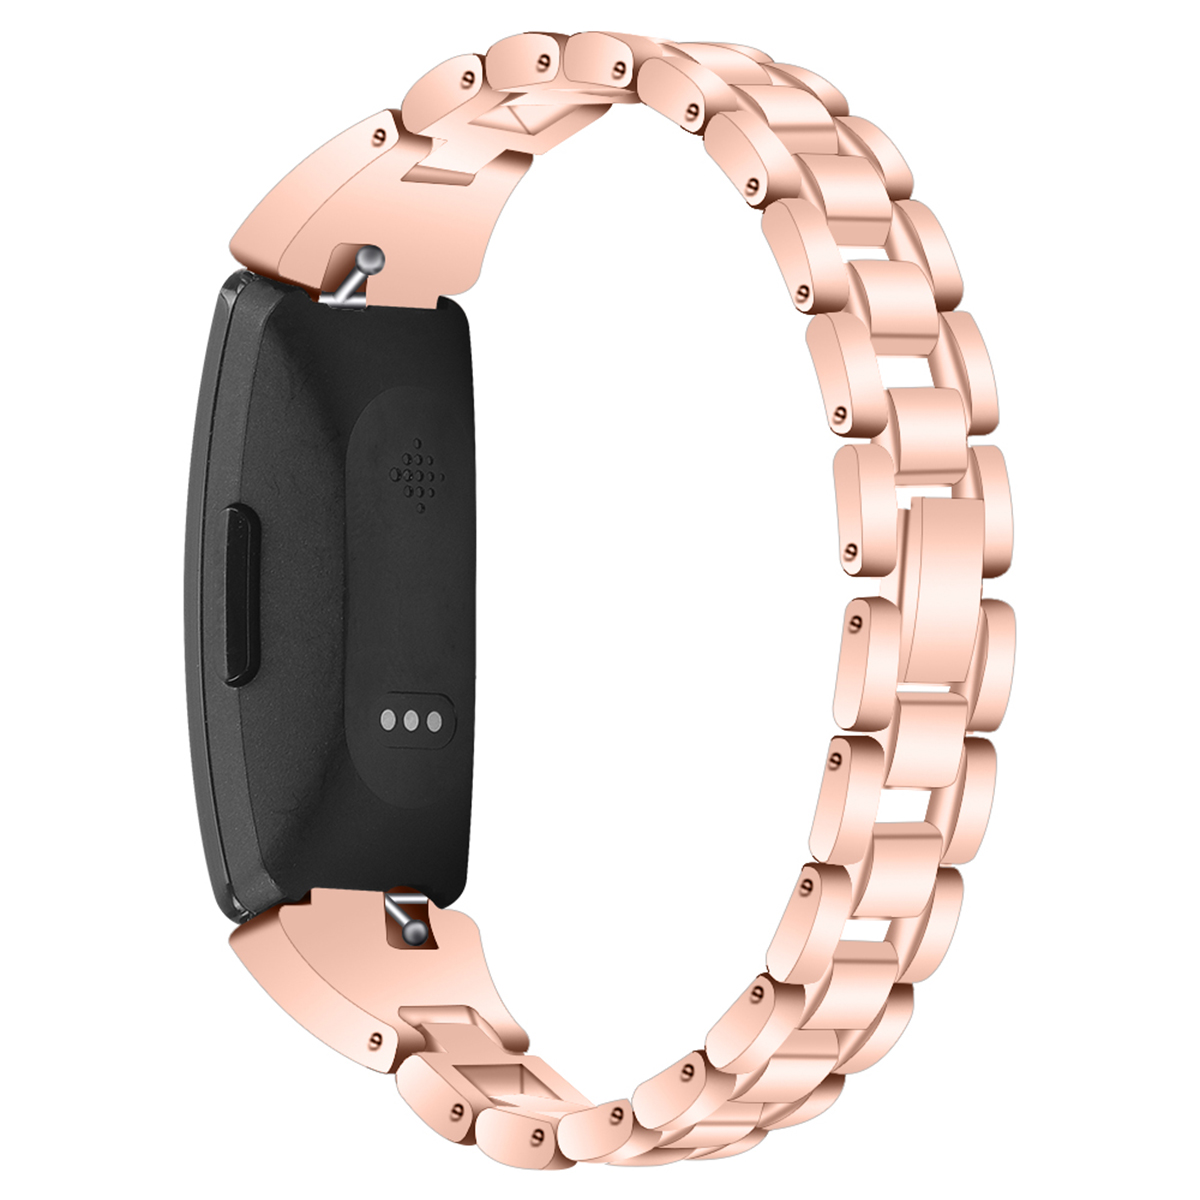 Bakeey-Watch-band-Stainless-Steel-Watch-Strap-For-Fitbit-InspireHR-1607091-11